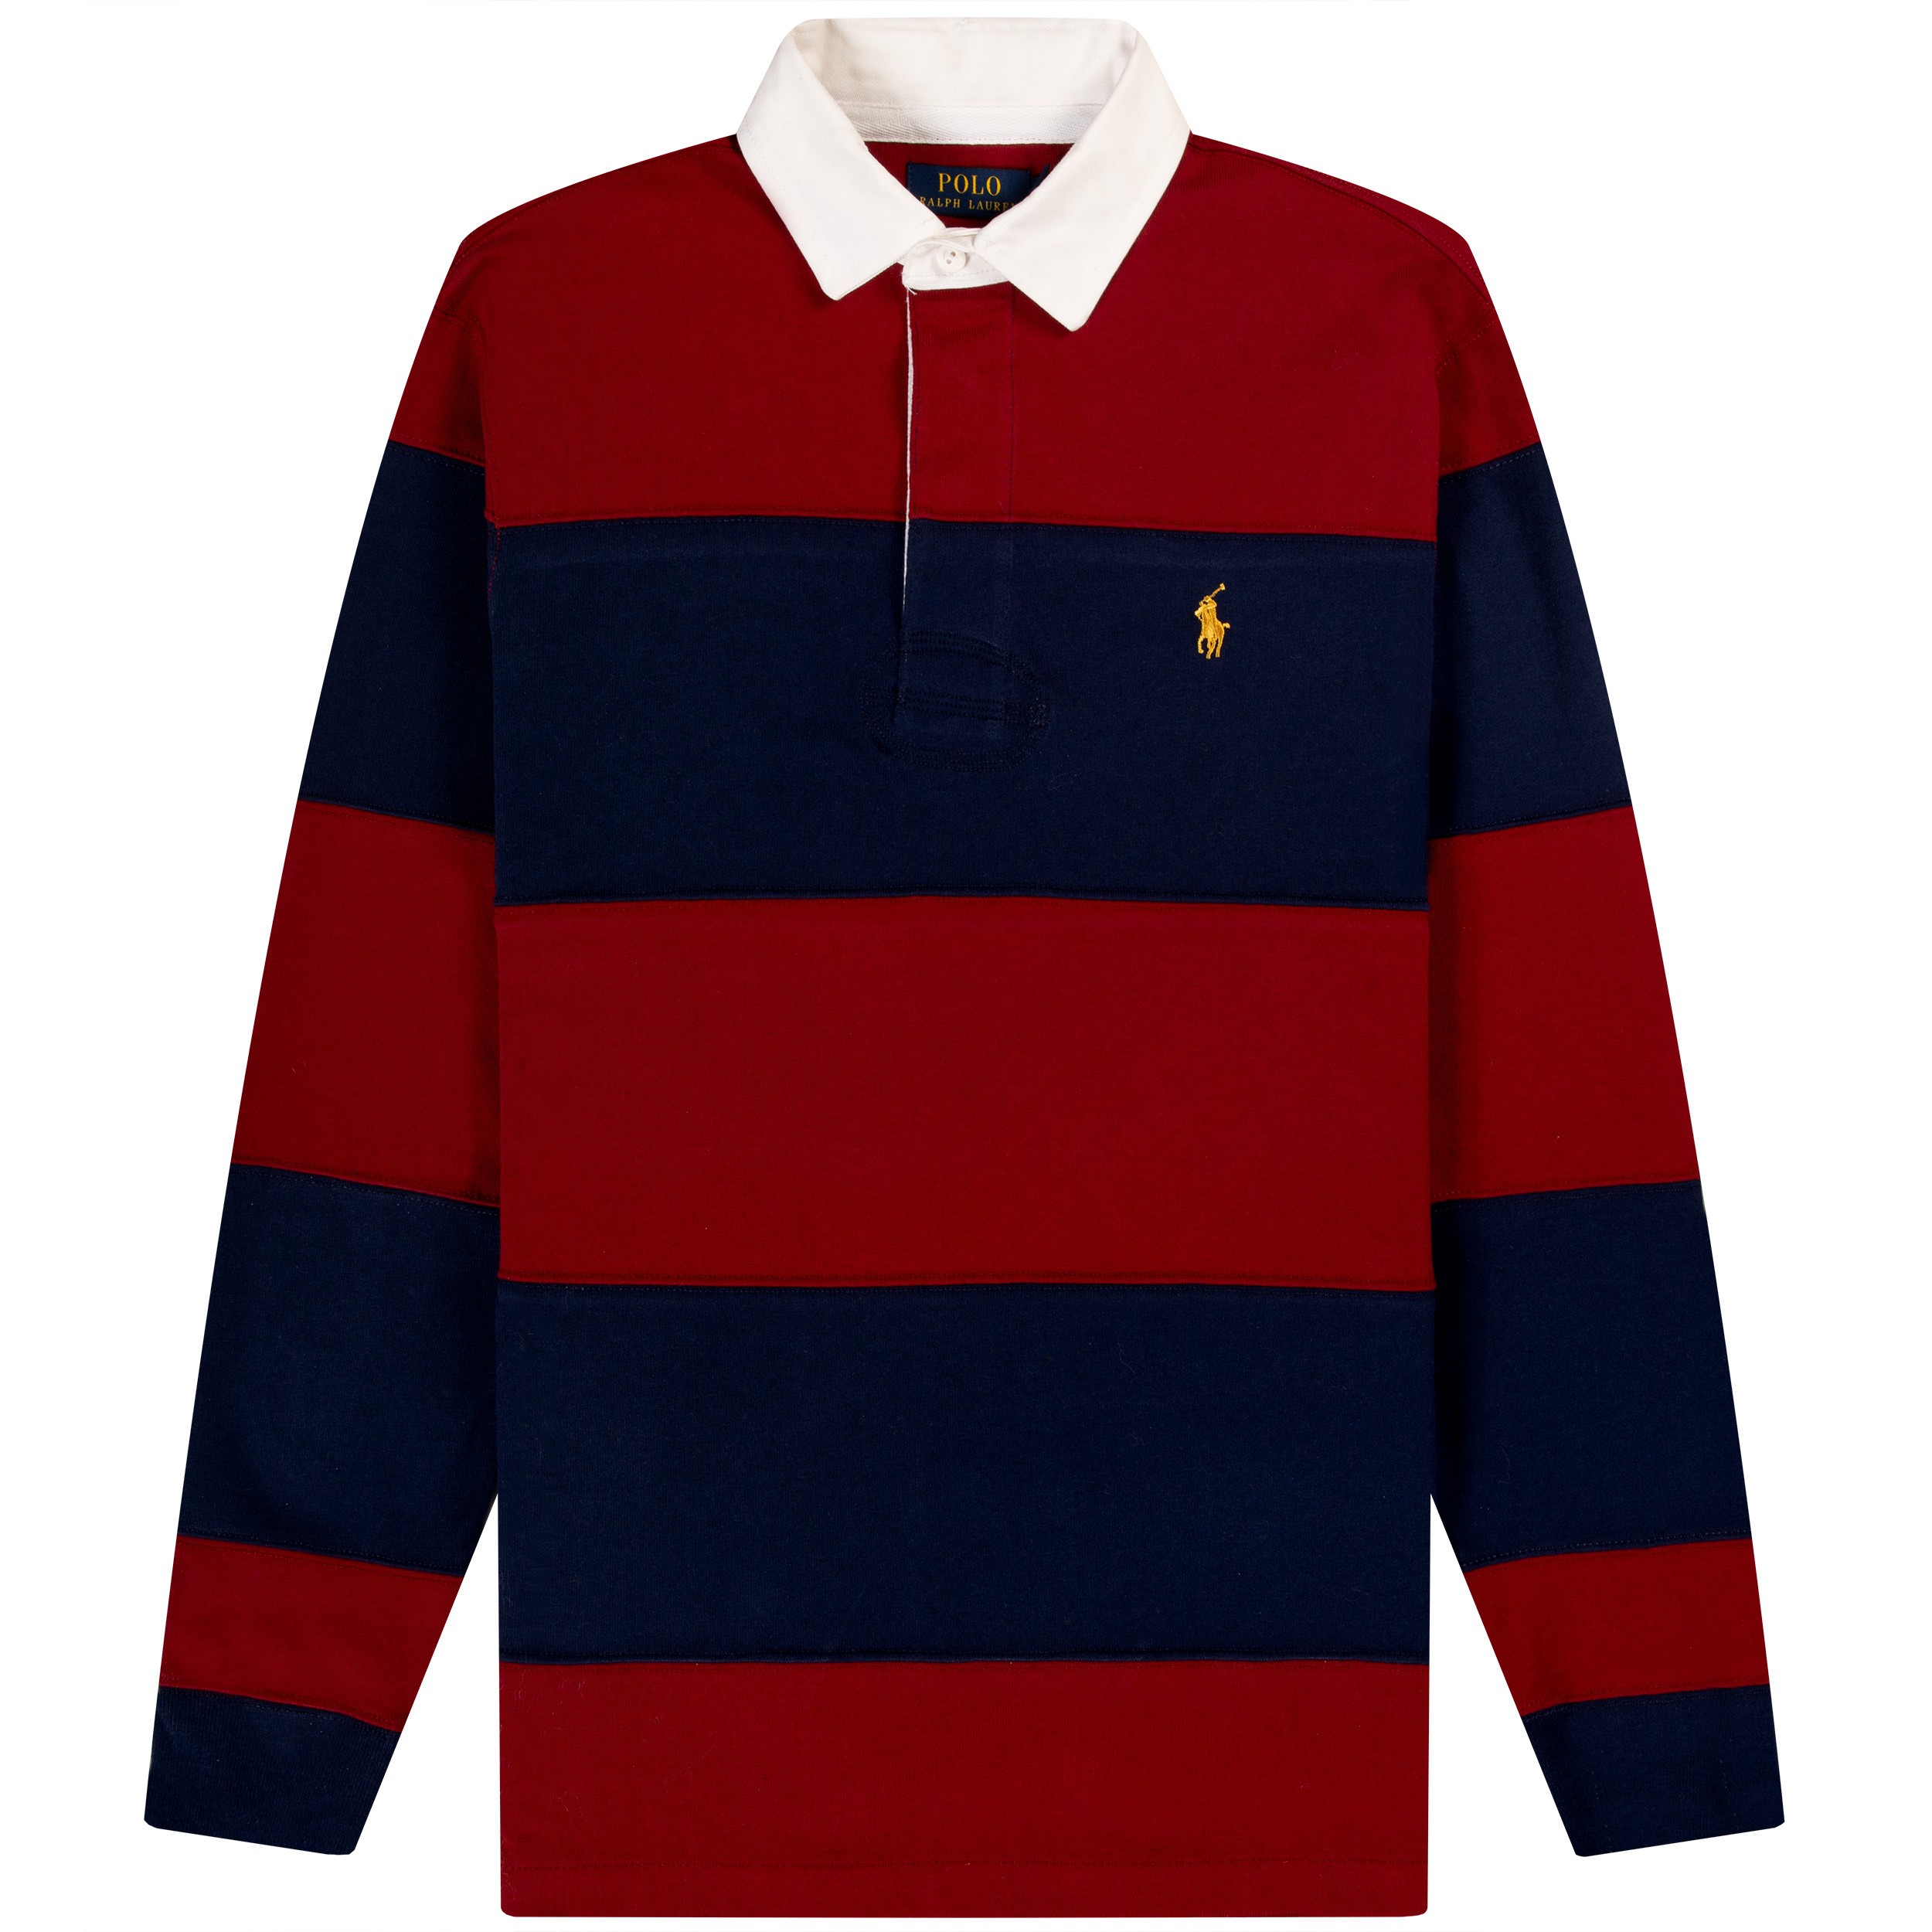 Polo Ralph Lauren Striped Rugby Polo Shirt Newport Navy/Holiday Red